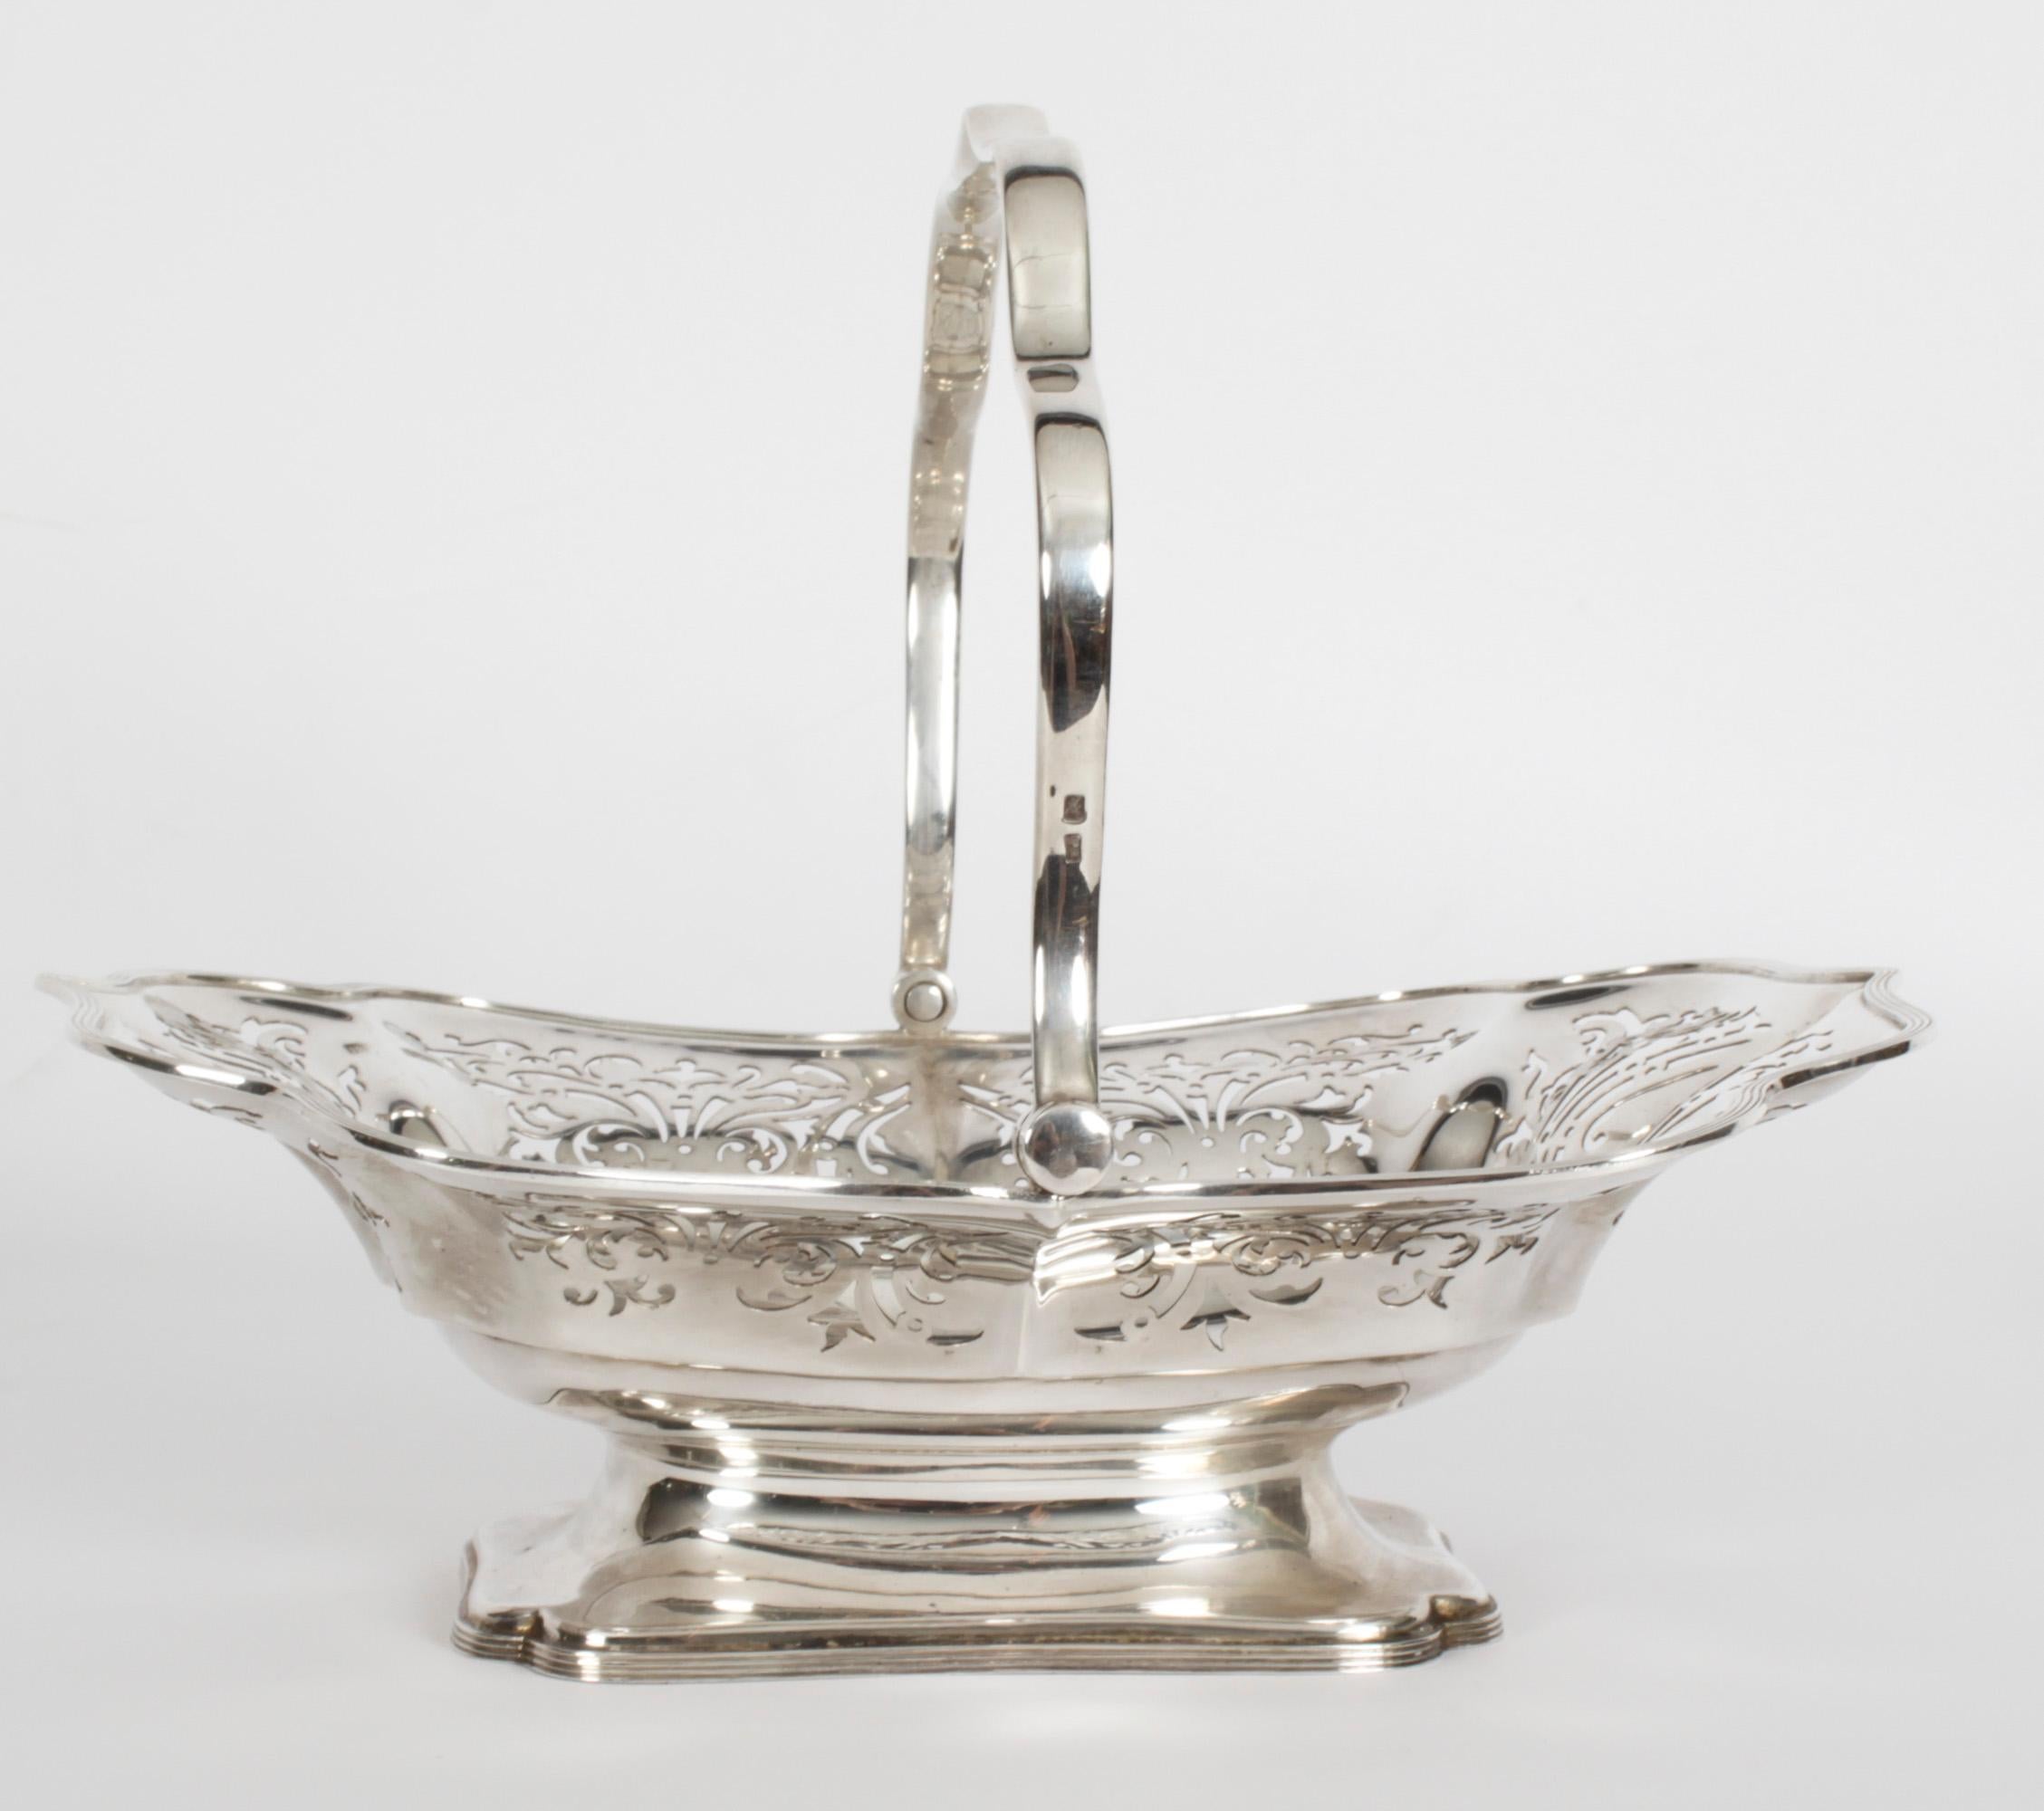 This is an exceptionally fine antique English Edwardian sterling silver fruit basket with hallmarks for Sheffield 1907 and the maker mark of Atkin Brothers.

This magnificent basket has a shaped swing handle on flared shaped oblong basket and